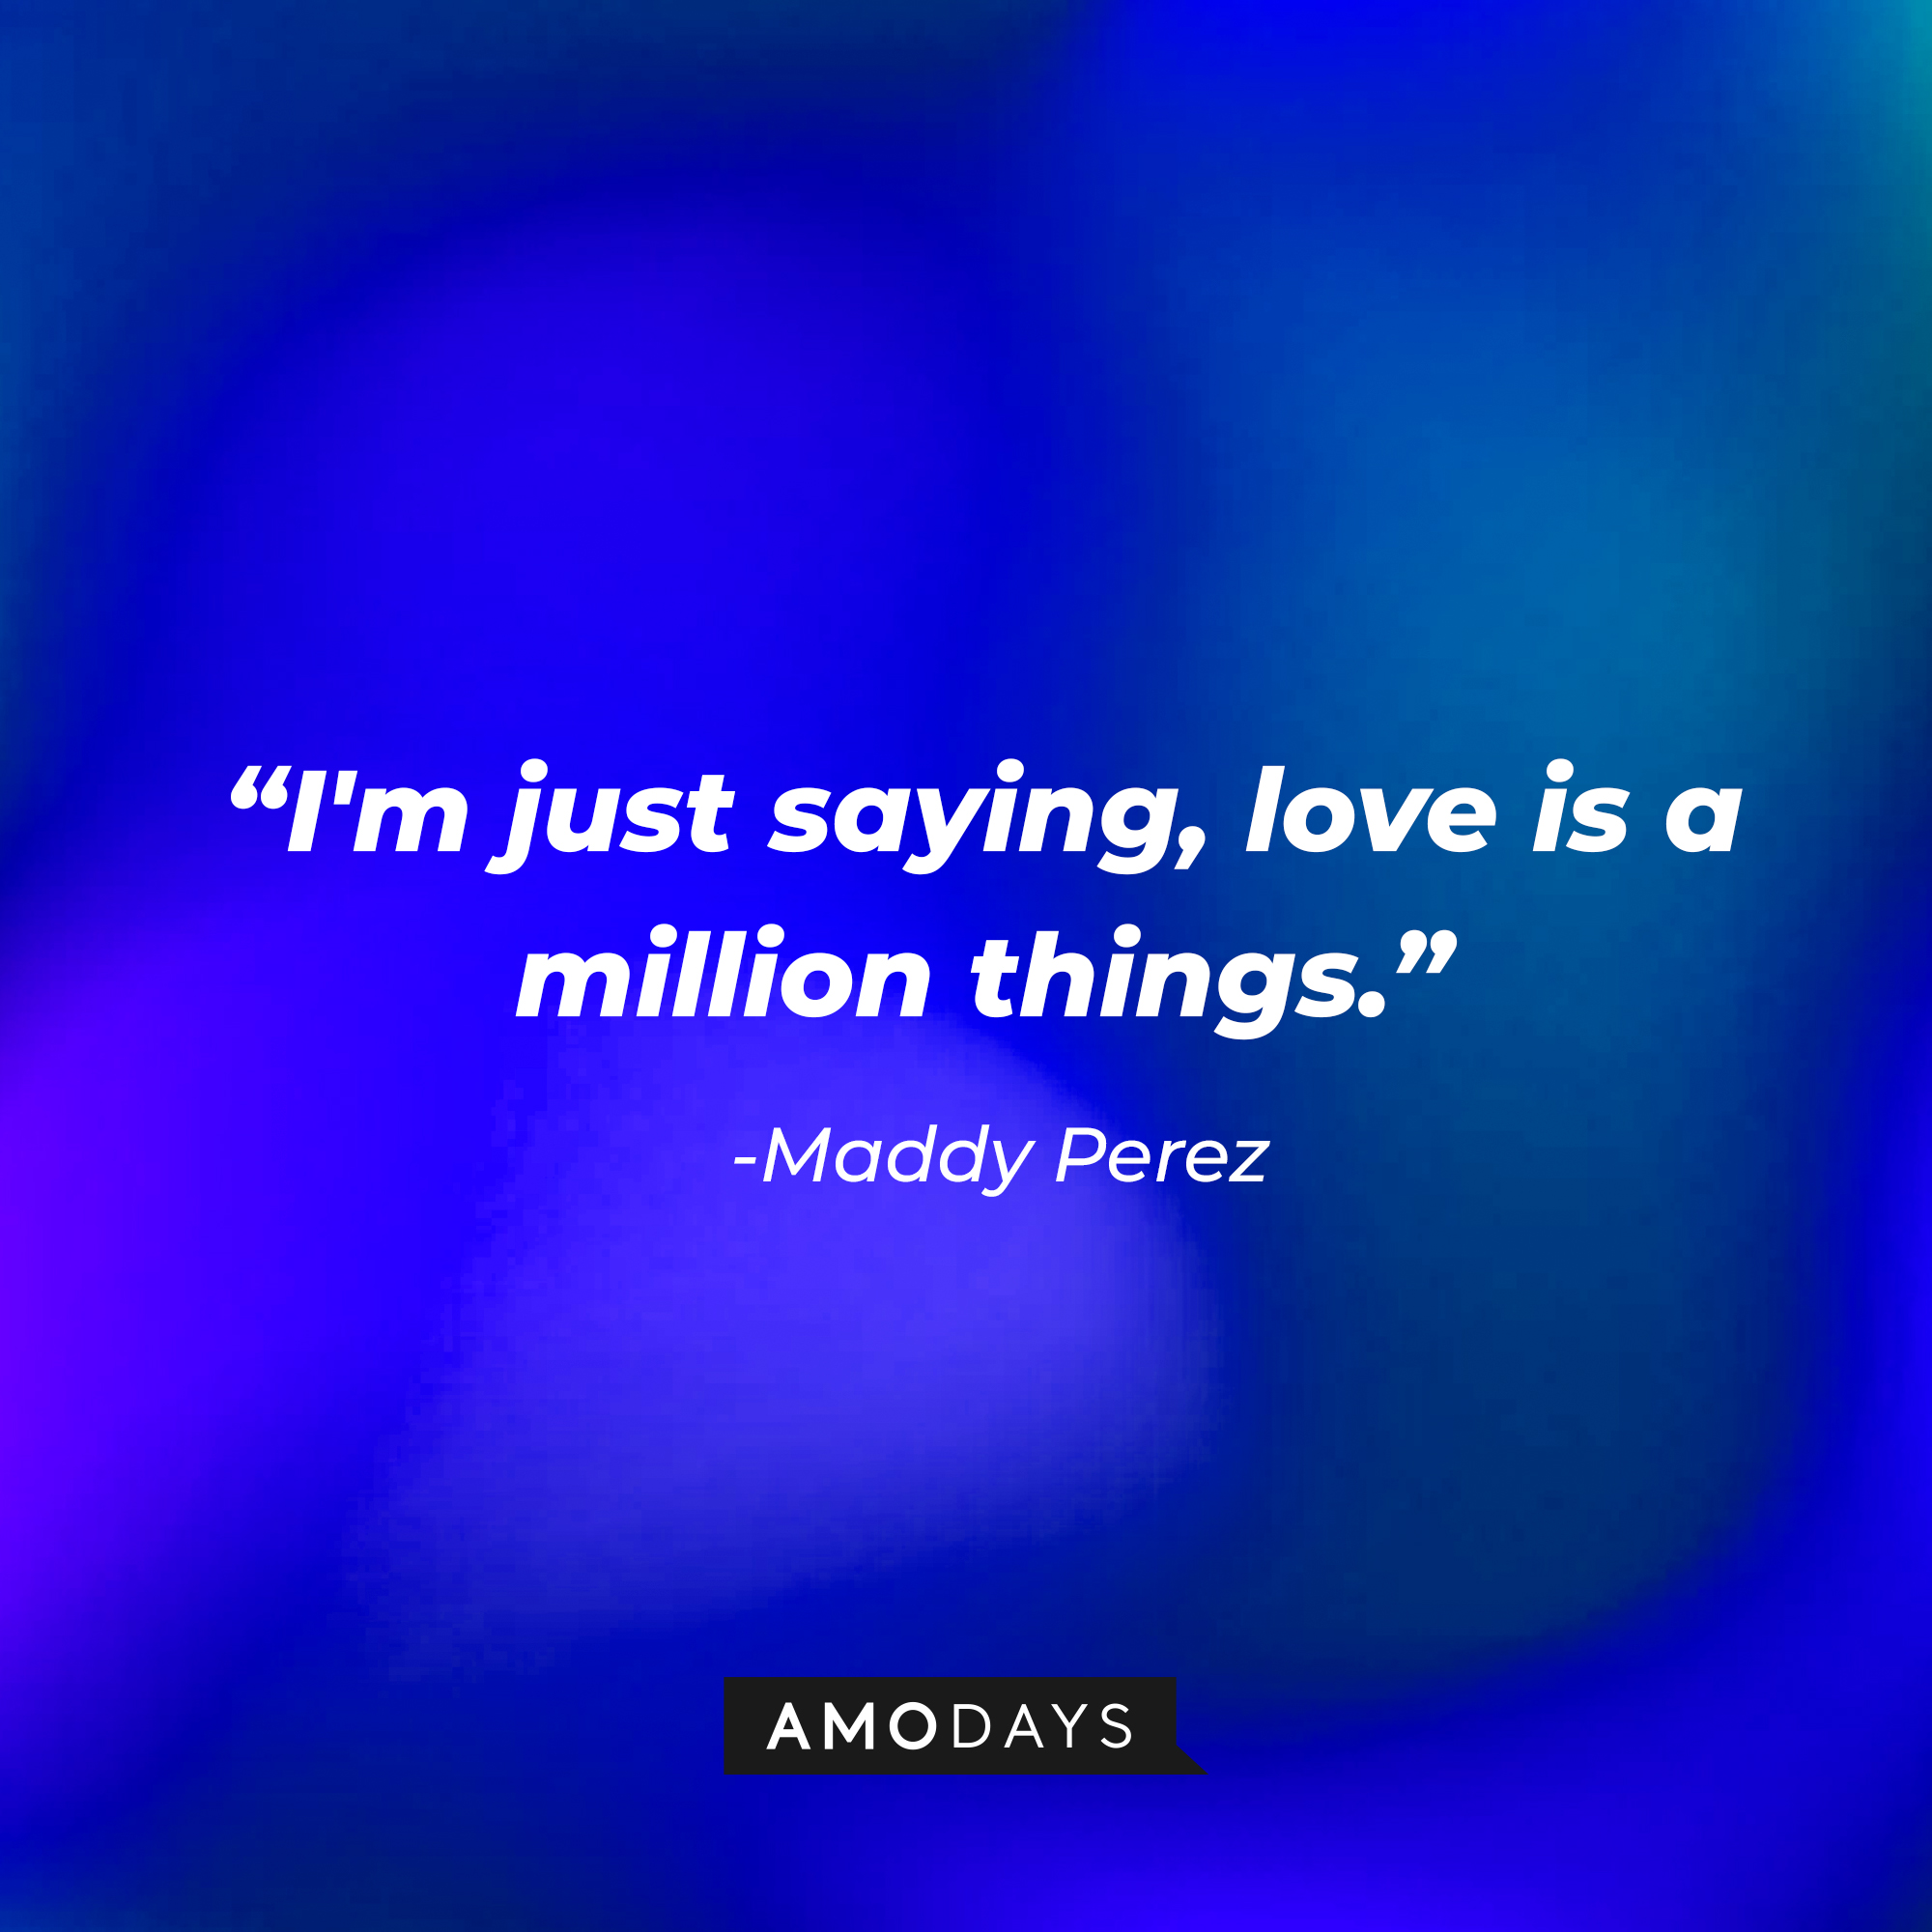 Maddy Perez’ quote: "I'm just saying, love is a million things.” | Source: AmoDays